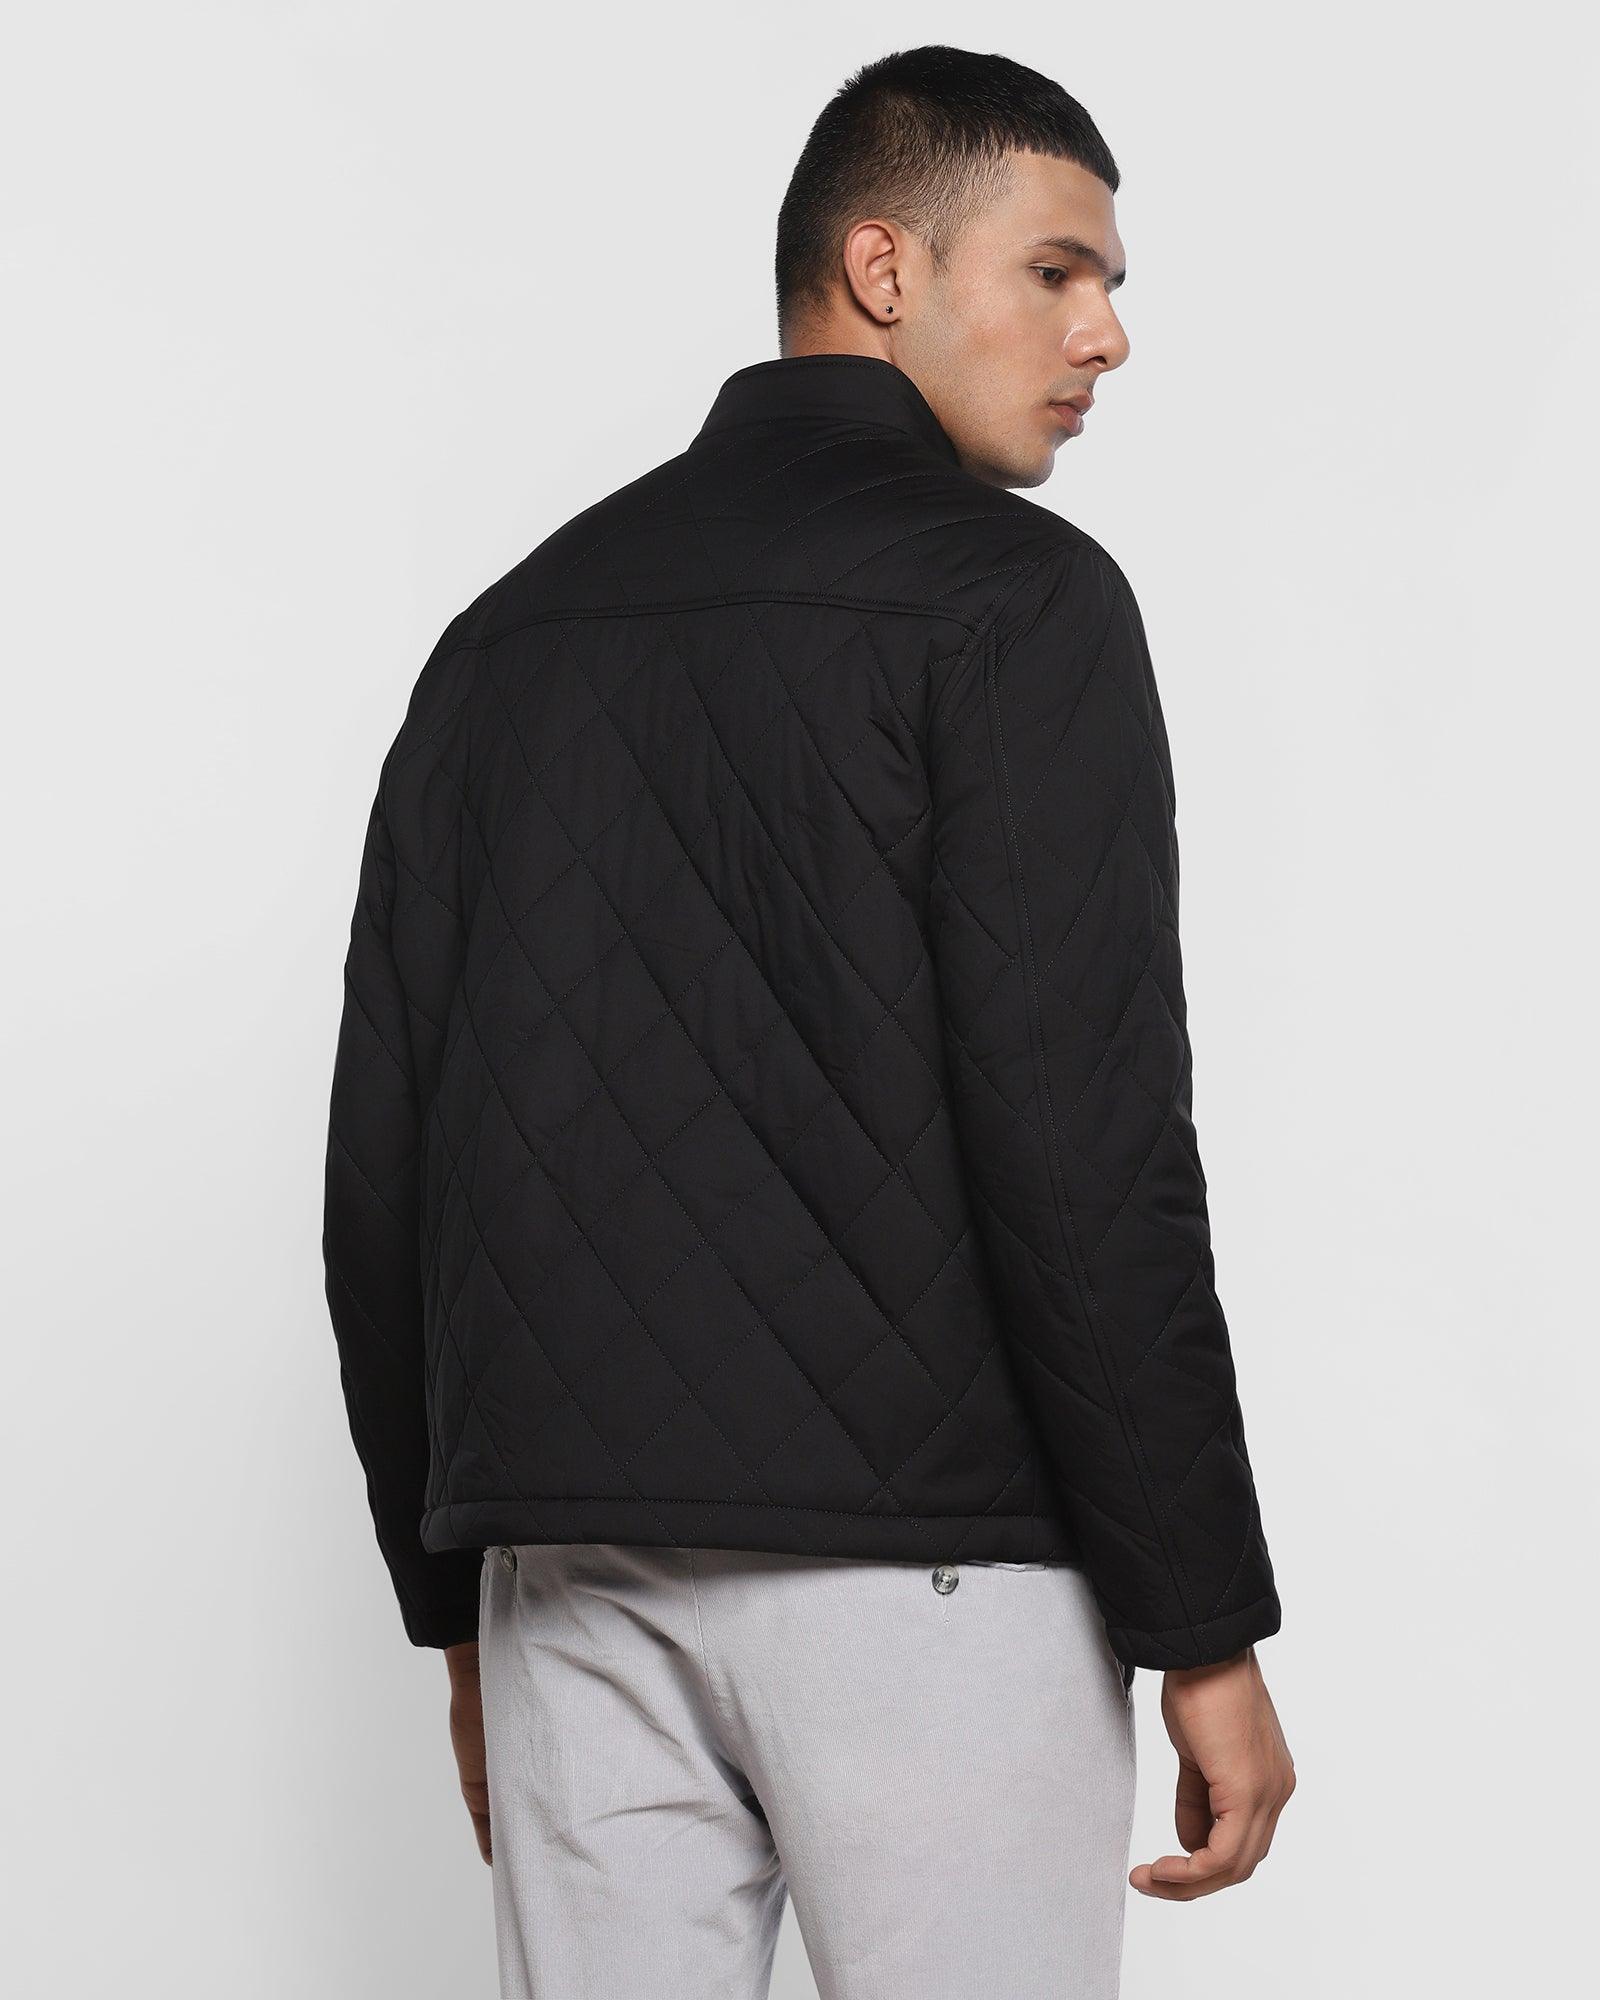 & Other Stories nylon quilted jacket in black | ASOS